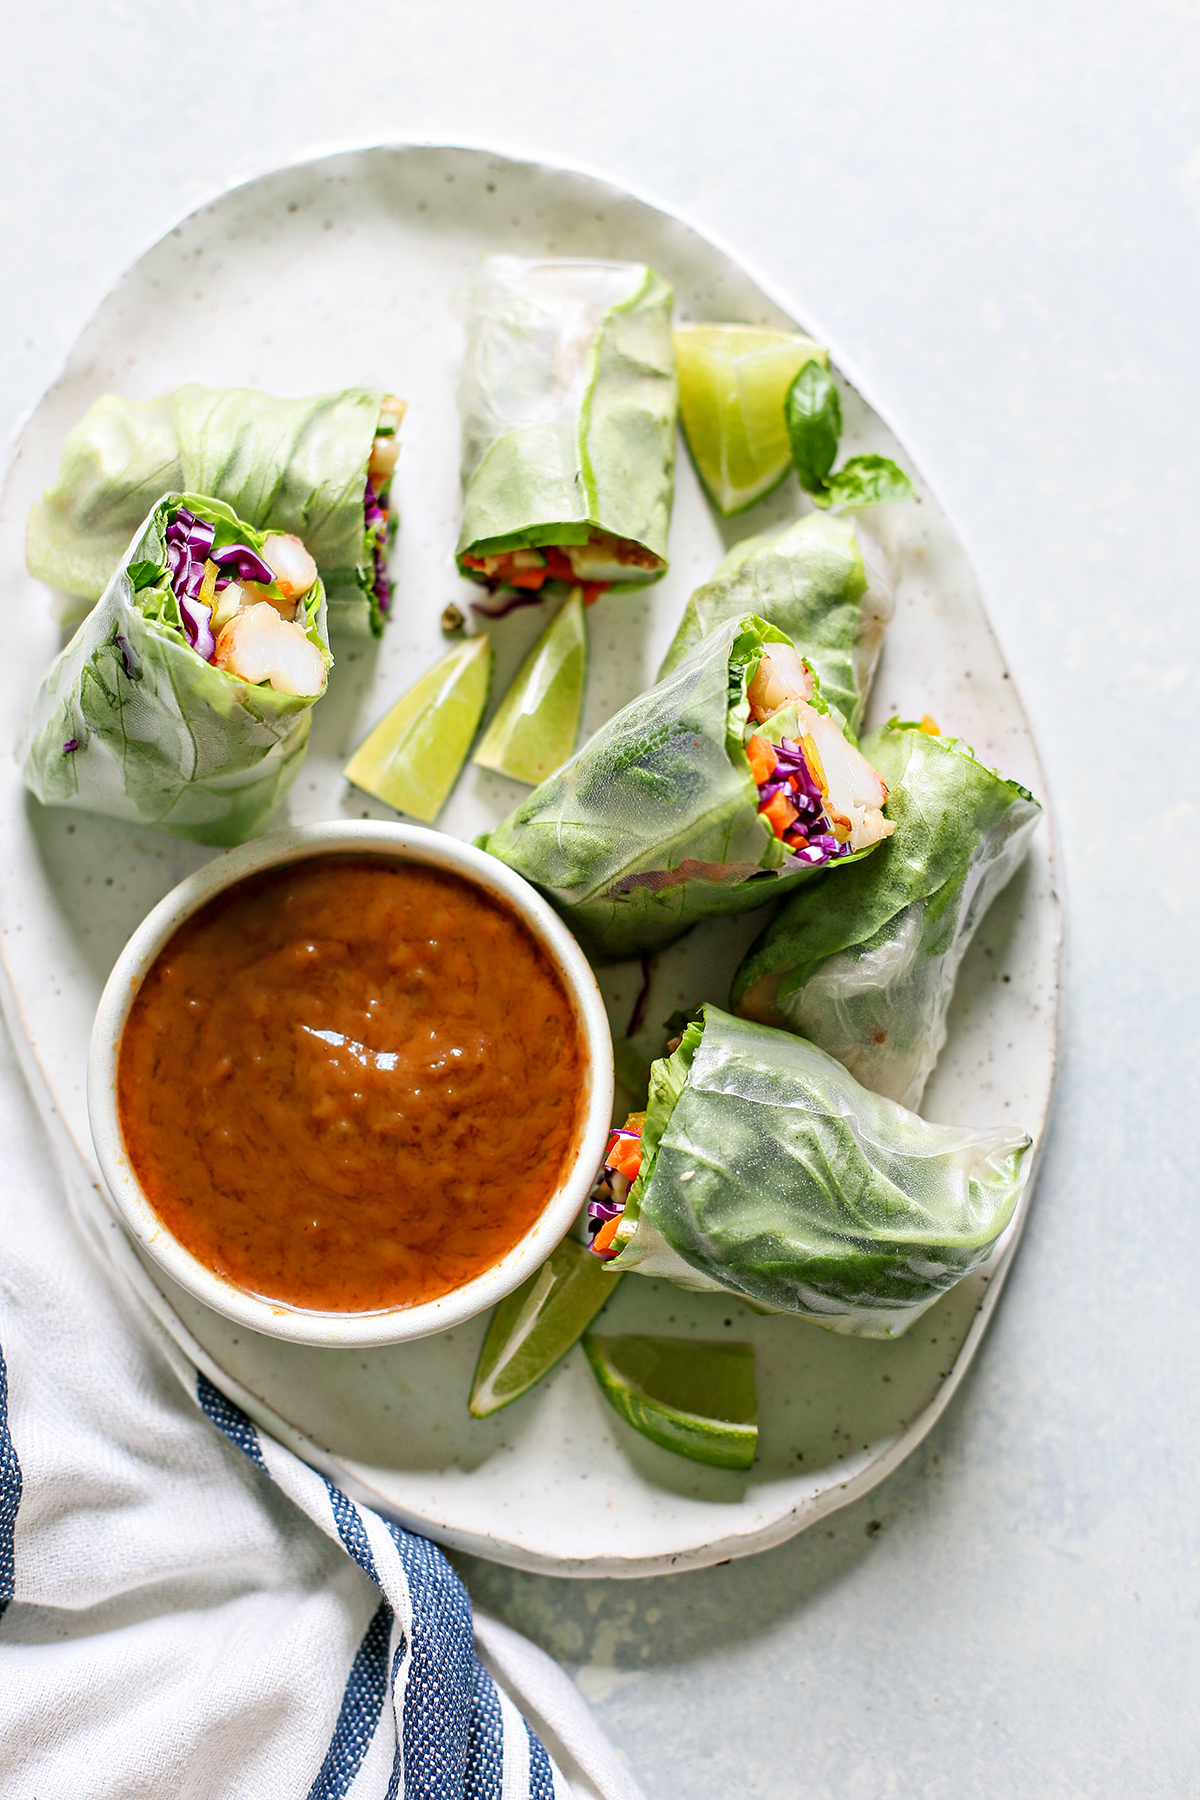 How to Wrap Spring Rolls: Both Chinese & Vietnamese! - The Woks of Life